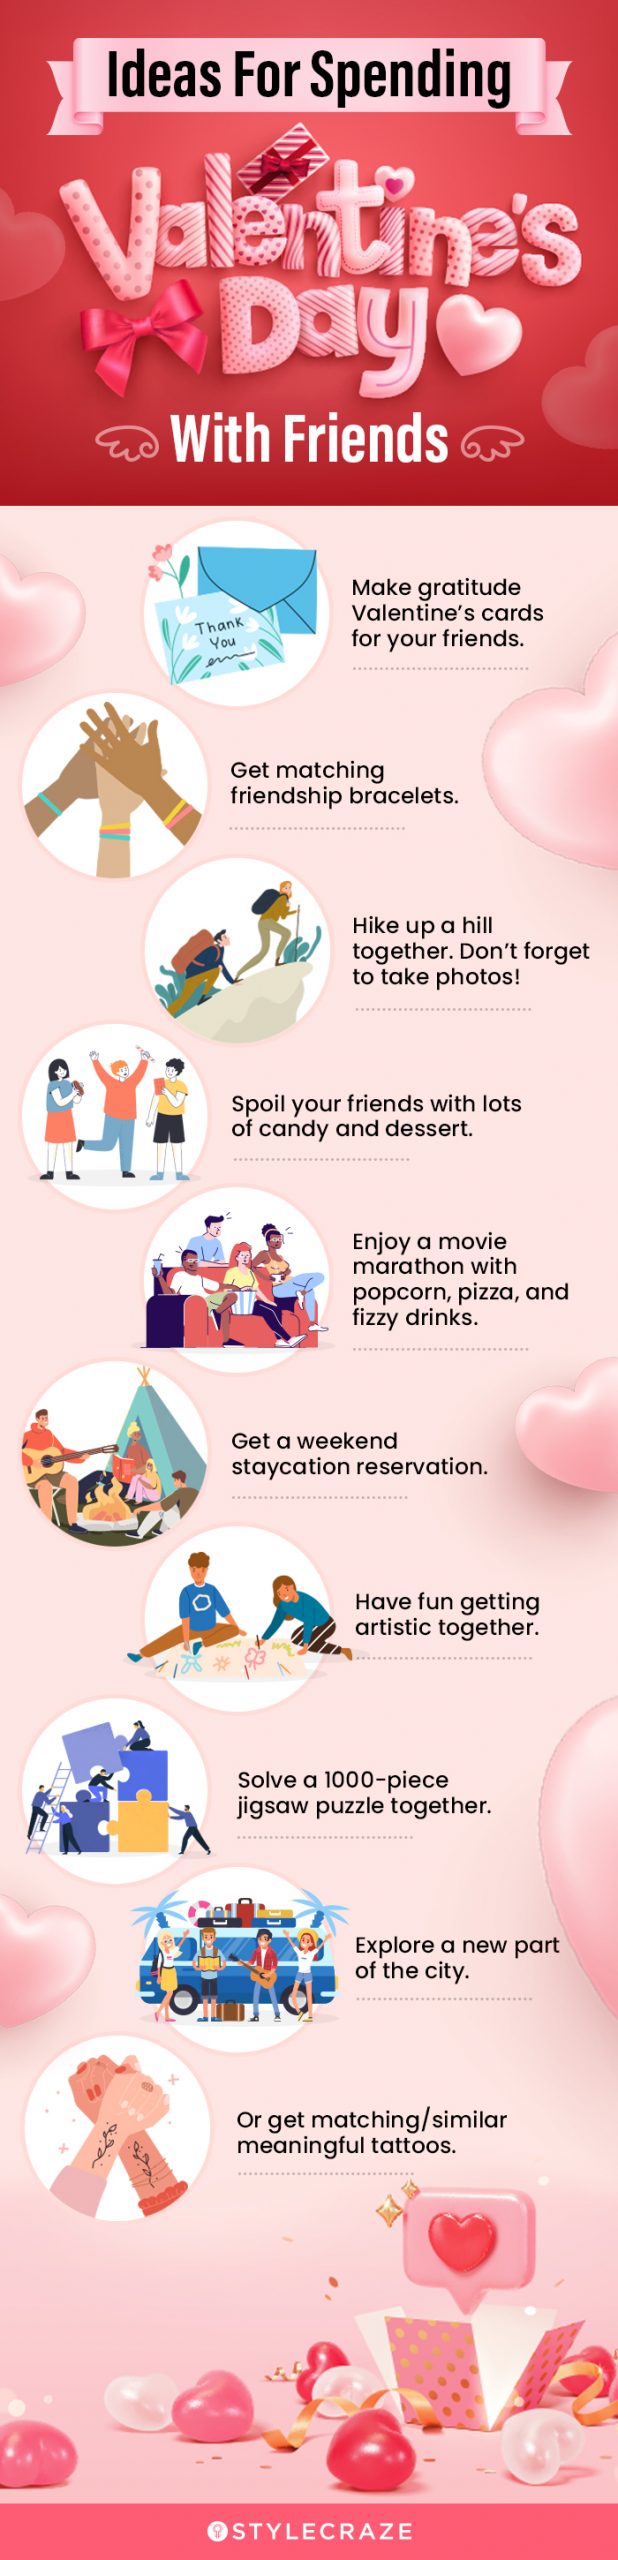 ideas for spending valentine's day with friends (infographic)